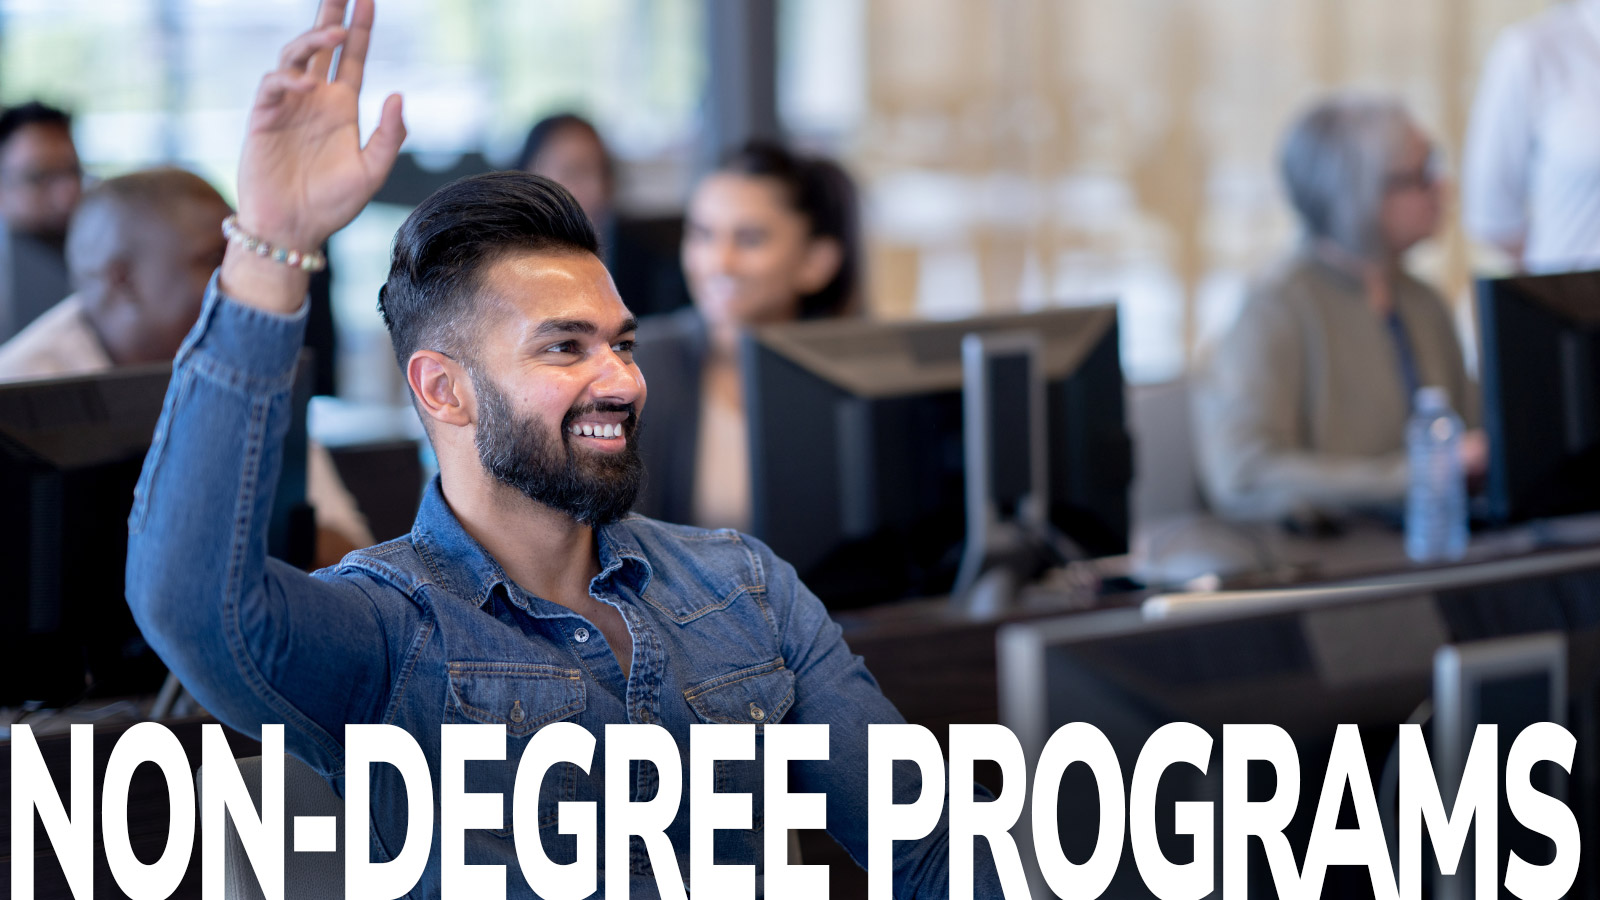 Link to Non-Degree Programs on this page